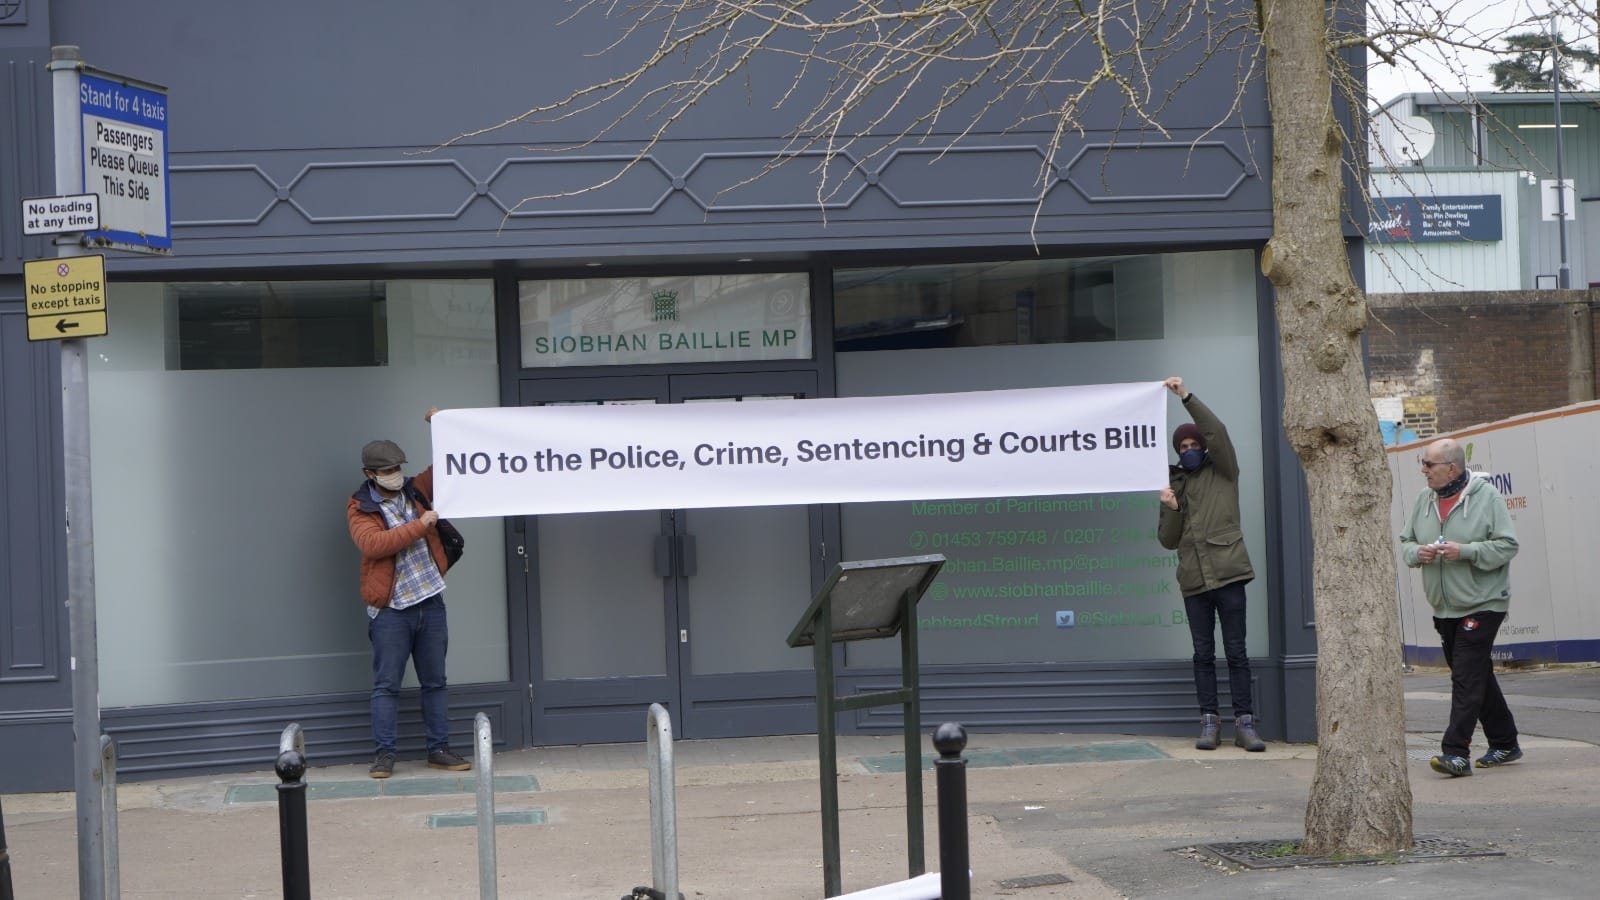 Two people standing outside Stroud MP Siobhan Baillie's office holding up a long white banner with black text that reads "NO to the Police, Crime, Sentencing & Courts Bill!"